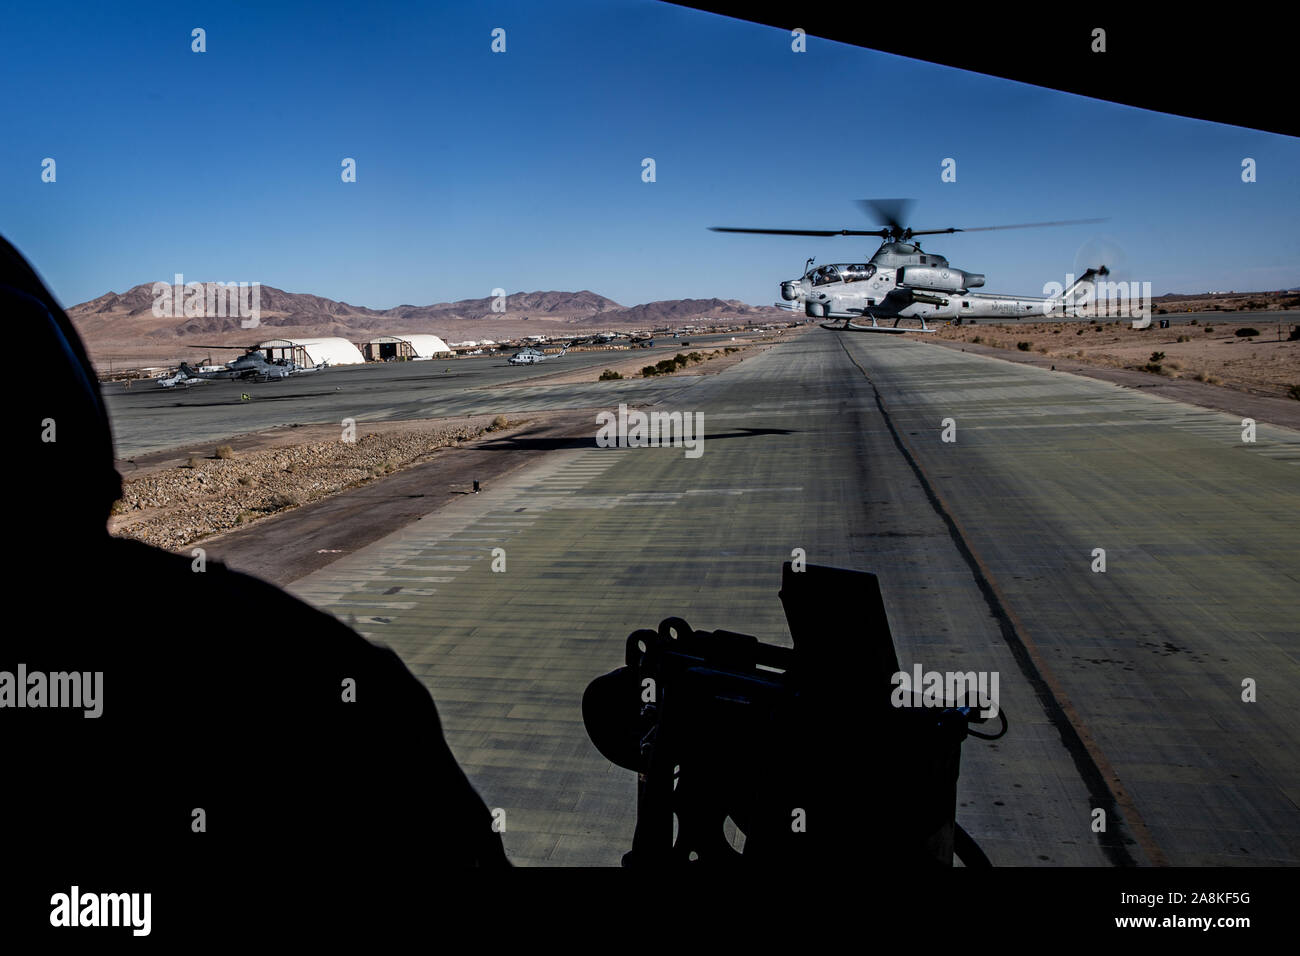 A U.S. Marine Corps UH-1Y Venom helicopter with Marine Light Attack Helicopter Squadron (HMLA) 269, 2nd Marine Aircraft Wing takes-off at the Strategic Expeditionary Landing Field, Marine Corps Air Ground Combat Center, Twentynine Palms, California, Nov. 7, 2019. HMLA-269 provided air support for a tactical recovery of aircraft and personnel training scenario in support of 2nd Marine Division’s (2d MARDIV) execution of MAGTF Warfighting Exercise (MWX) 1-20. MWX is 2nd MARDIV’s largest operation in decades. (U.S. Marine Corps photo by Sgt. Stormy Mendez) Stock Photo